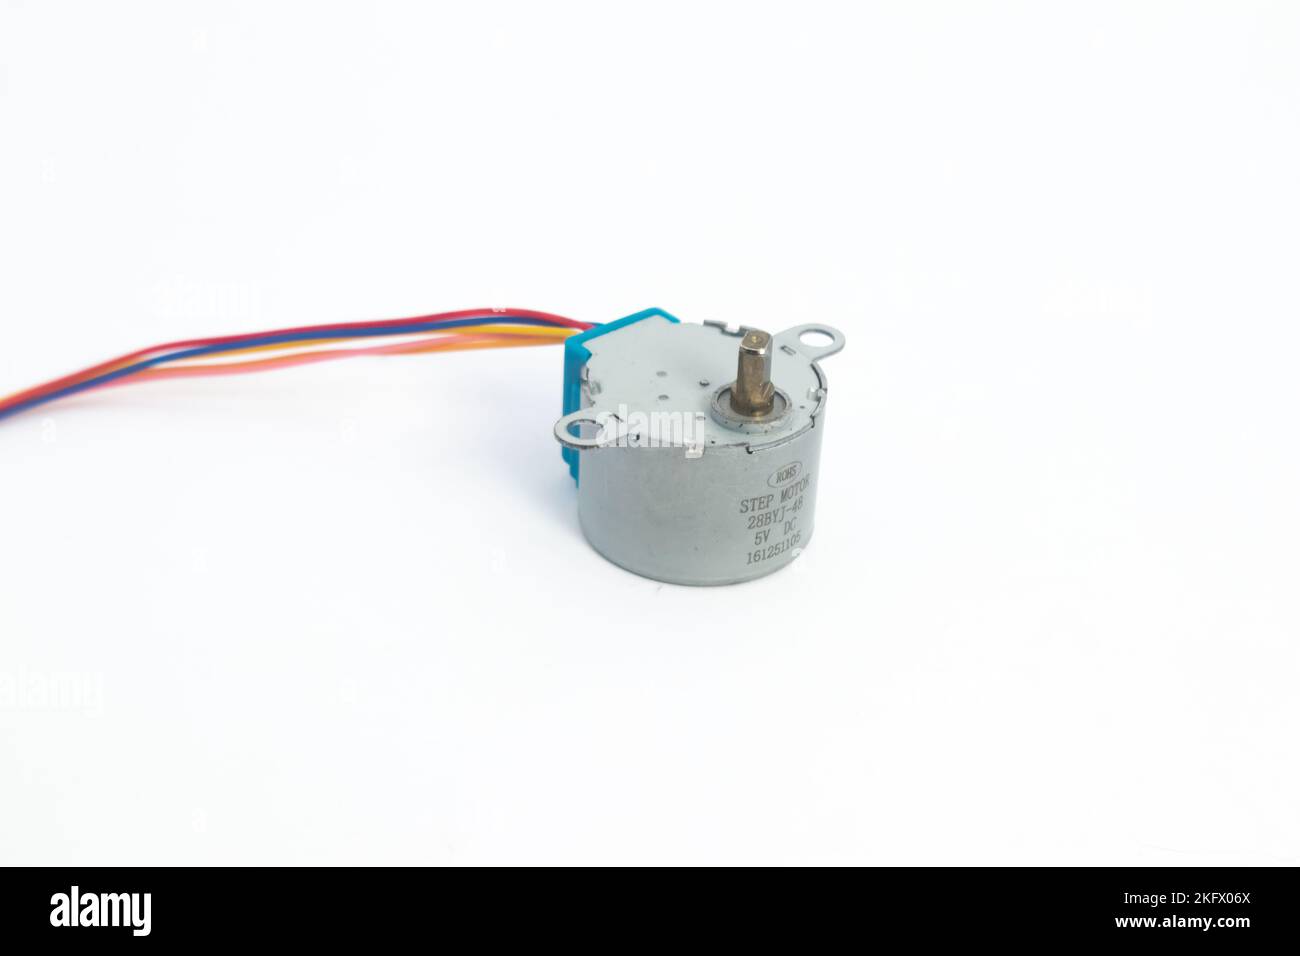 A step motor module. This module is used for electronics hobbyists for DIY materials. Stock Photo